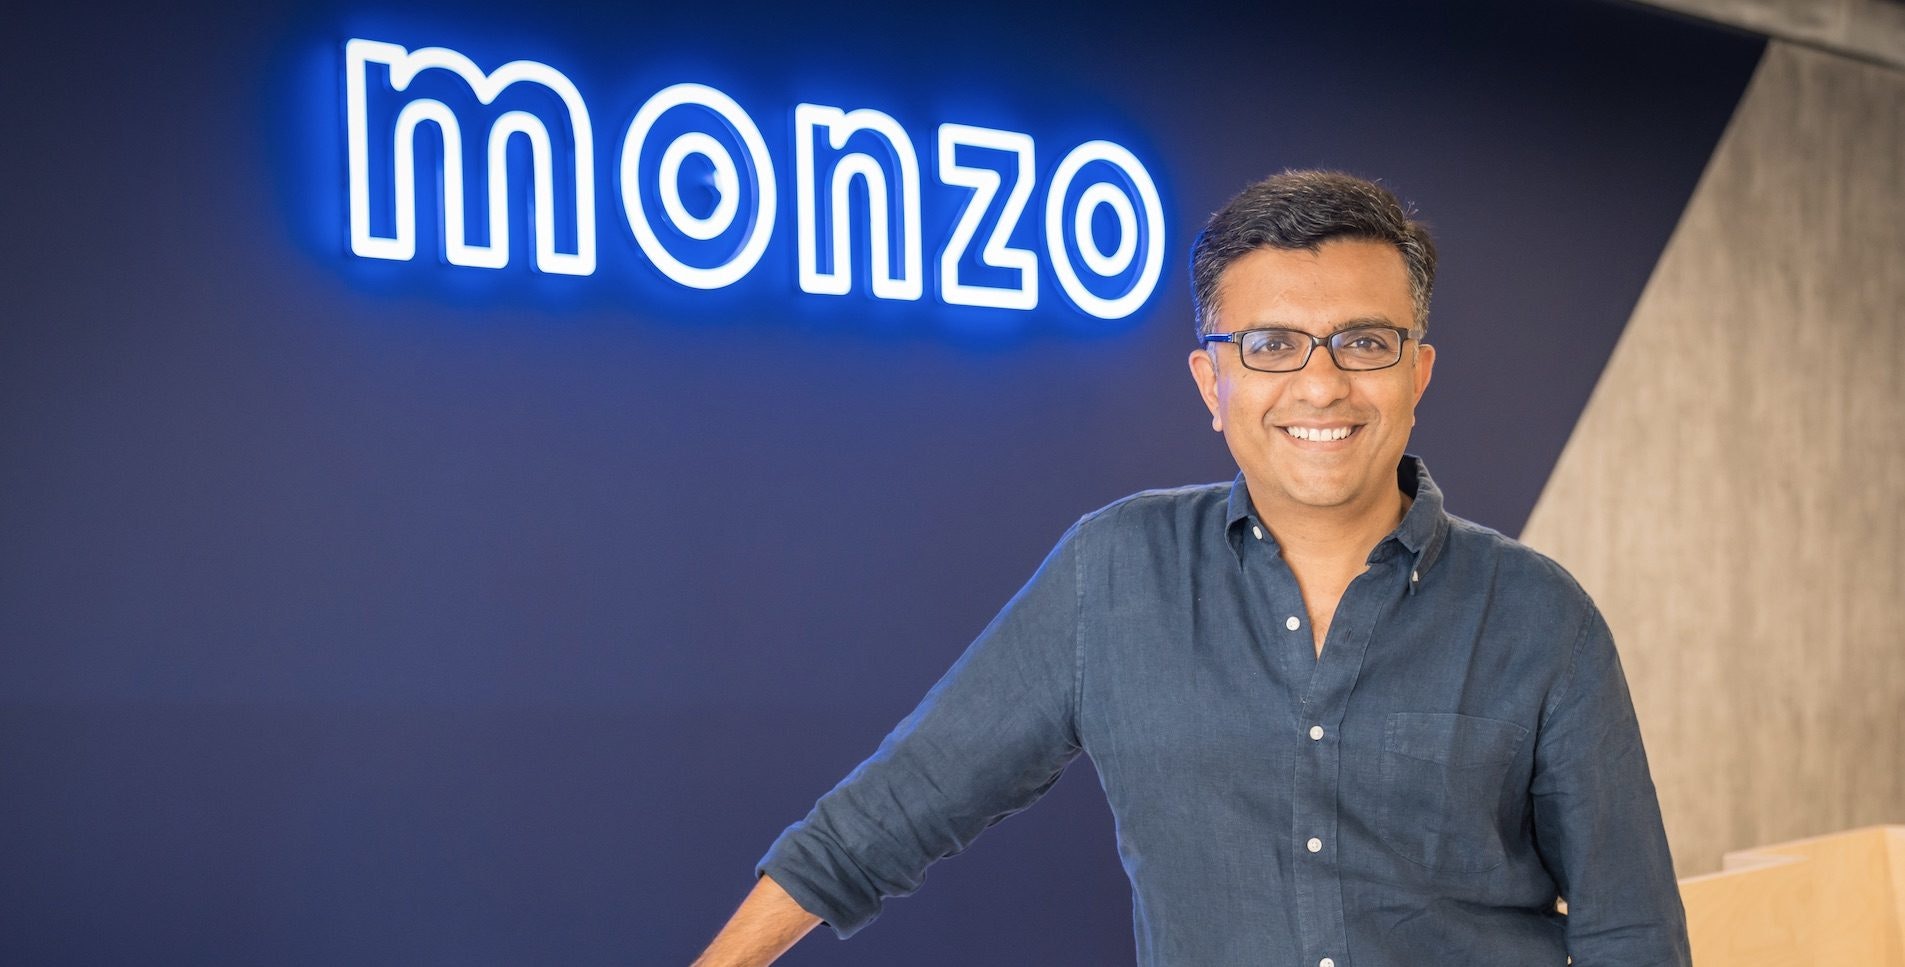 TS Anil, Monzo's Chief Executive Officer standing in front of a Monzo sign